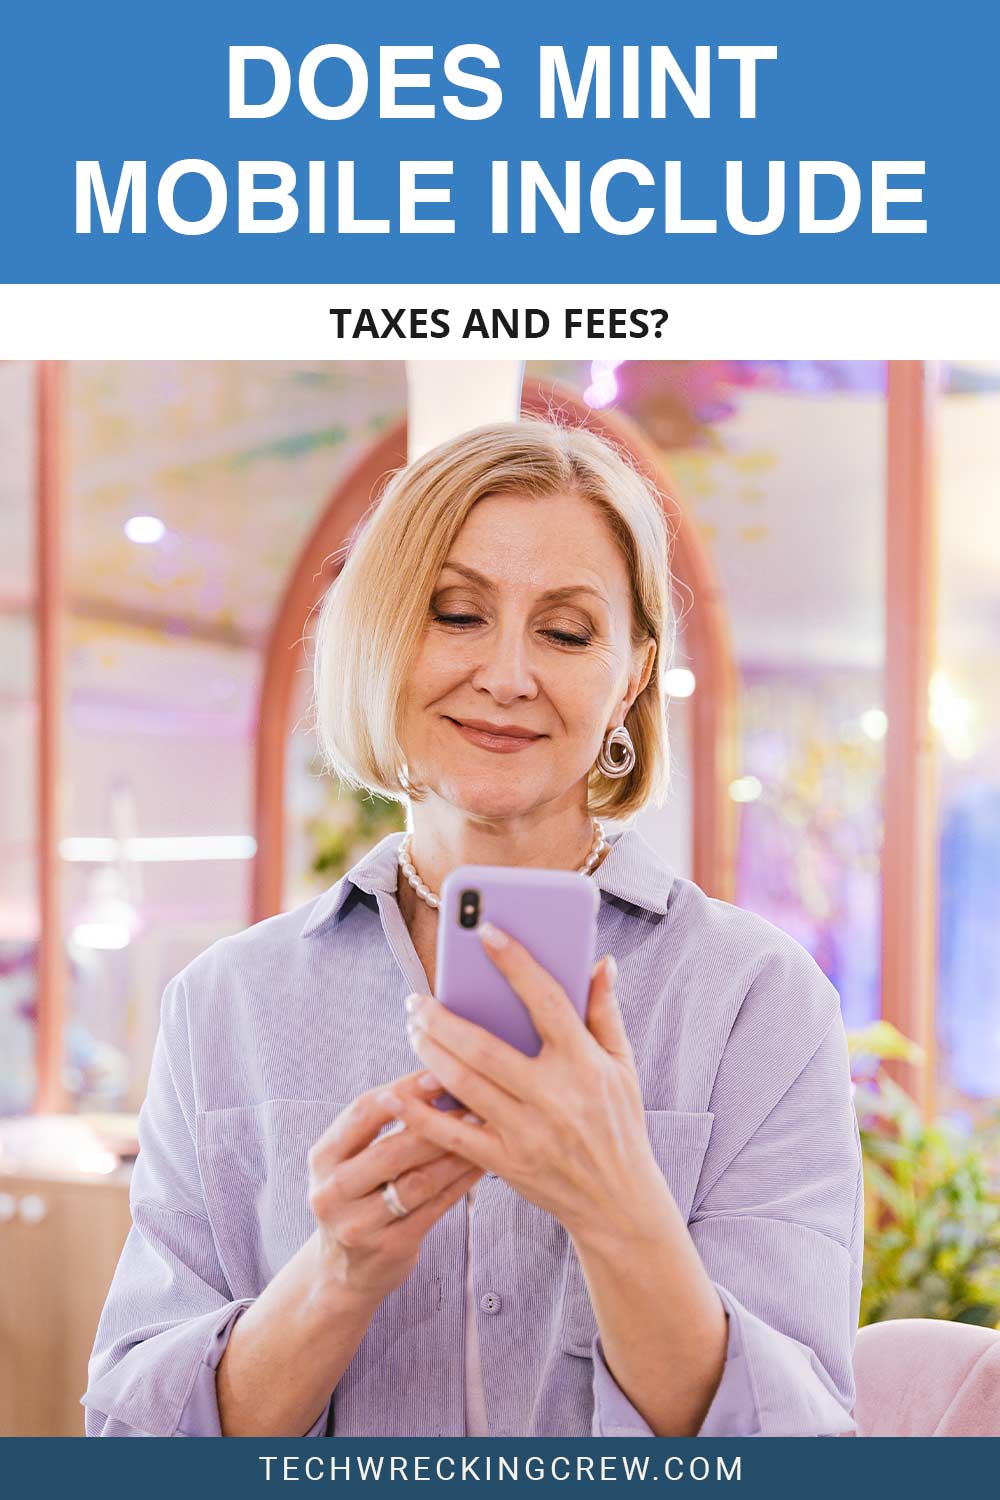 Does Mint Mobile Include Taxes and Fees?